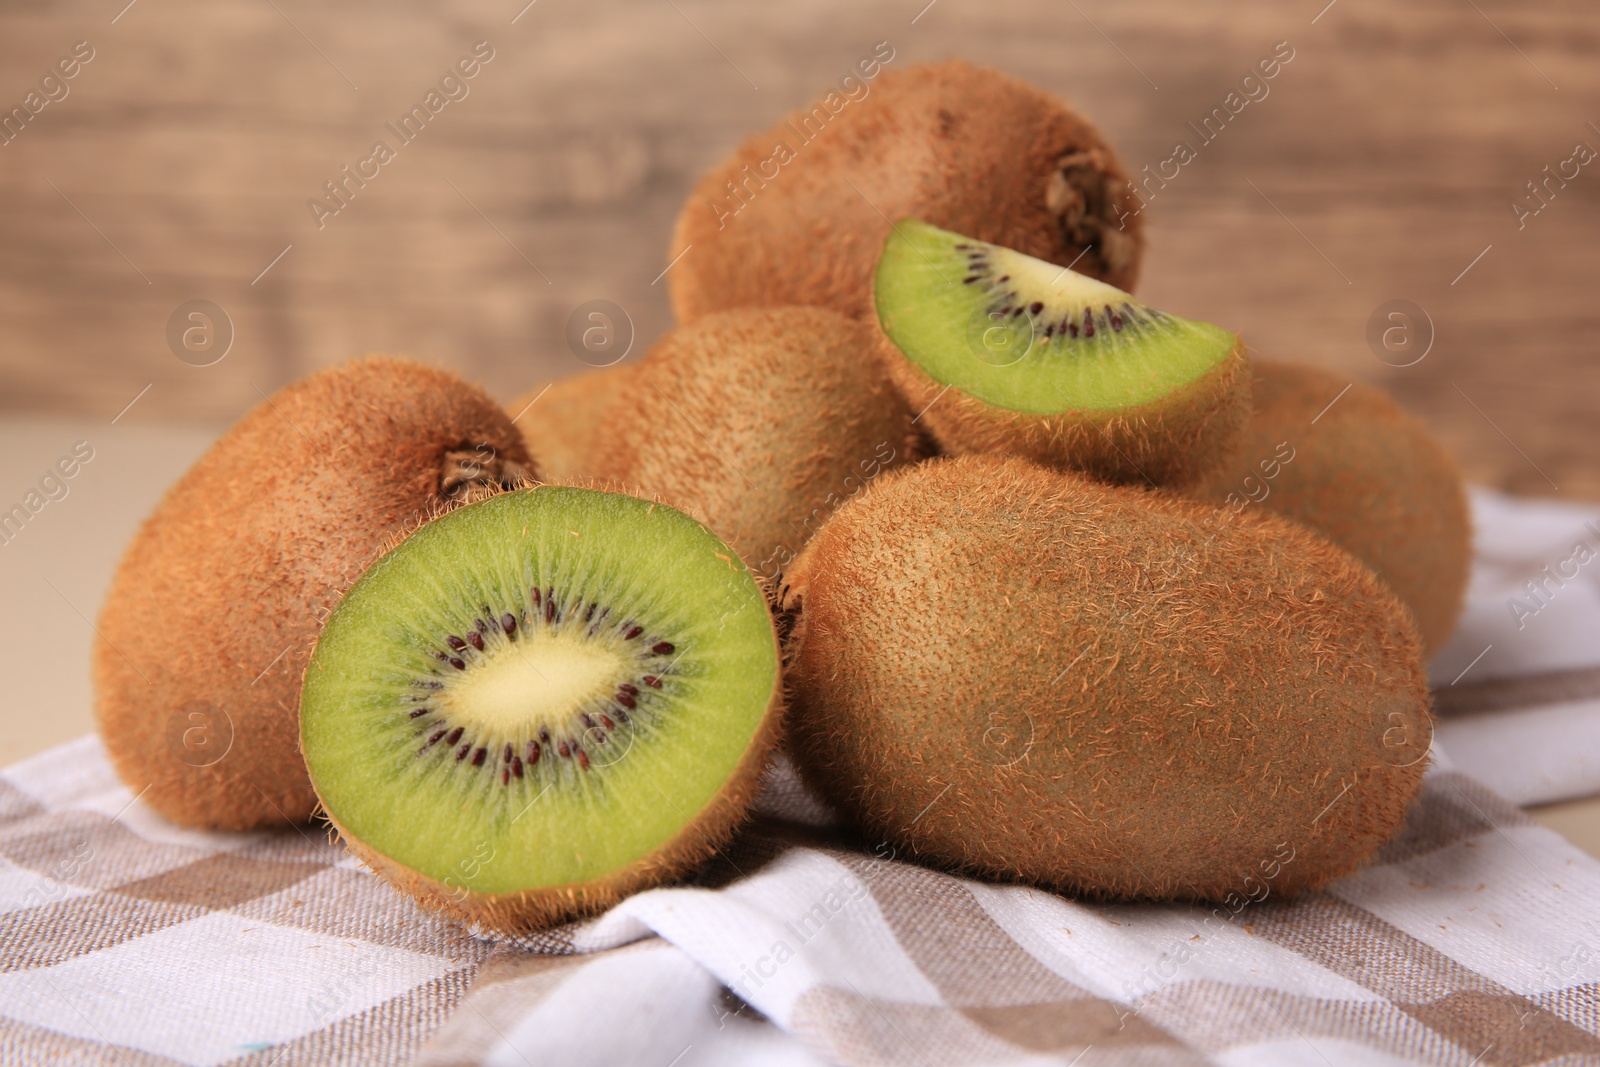 Photo of Heap of whole and cut fresh kiwis on checkered tablecloth, closeup